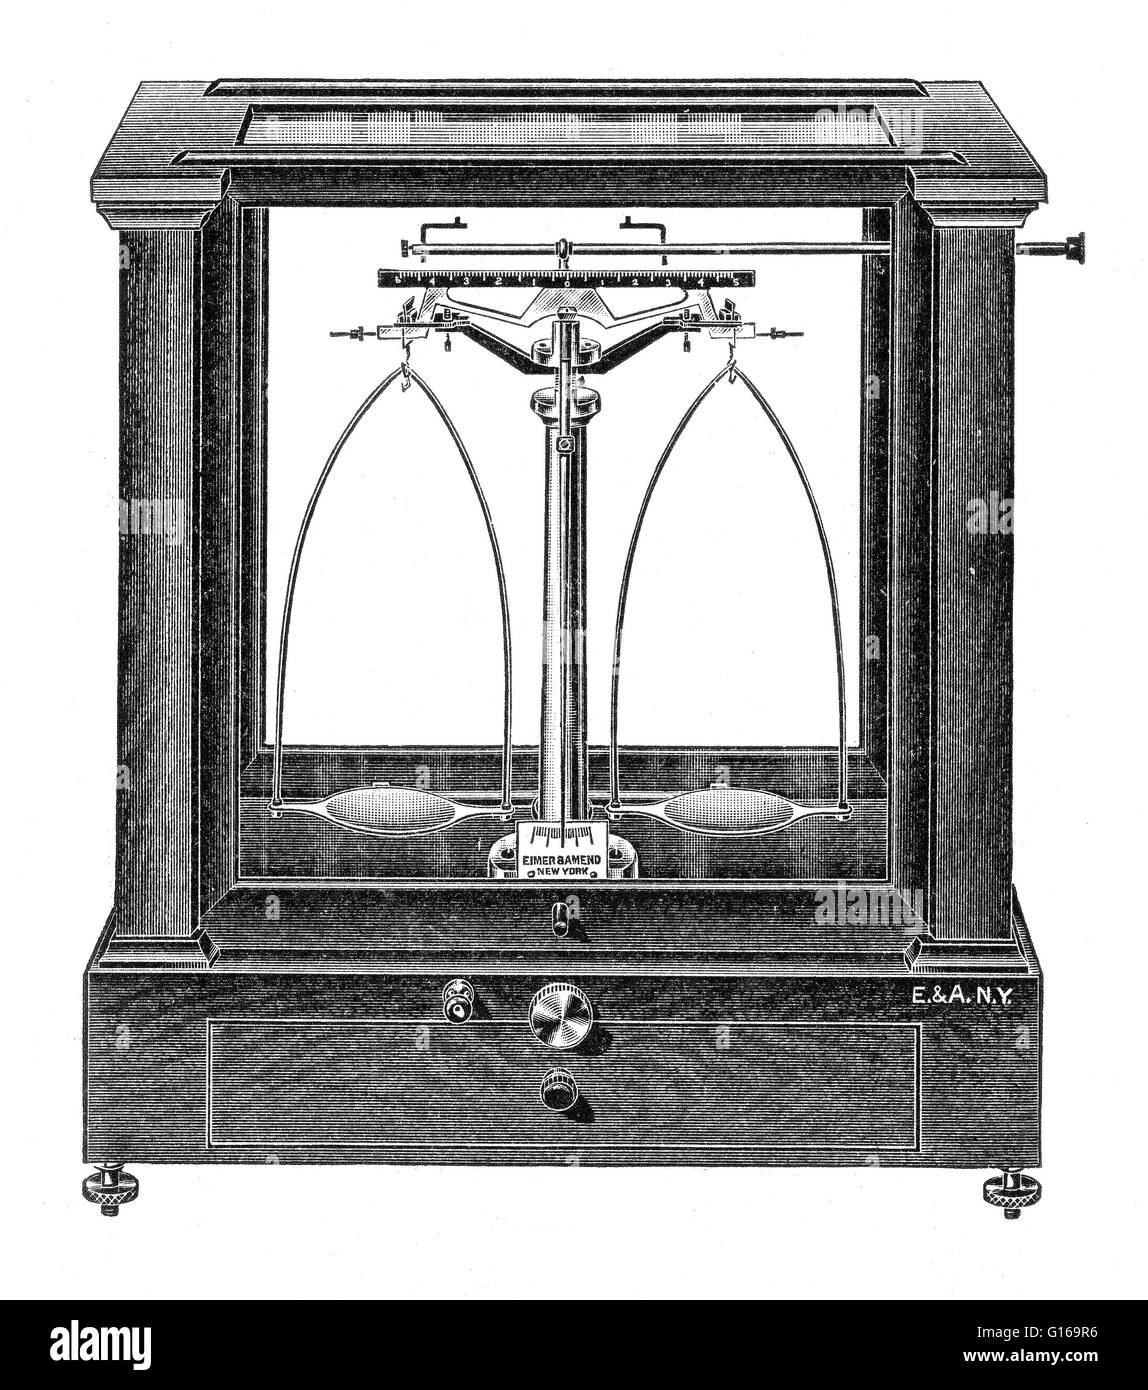 An analytical balance is a class of precision balance designed to measure small mass in the sub-milligram range (sensitivity of 0.1 milligram). The measuring pan of an analytical balance is inside a transparent enclosure with doors so that dust does not c Stock Photo